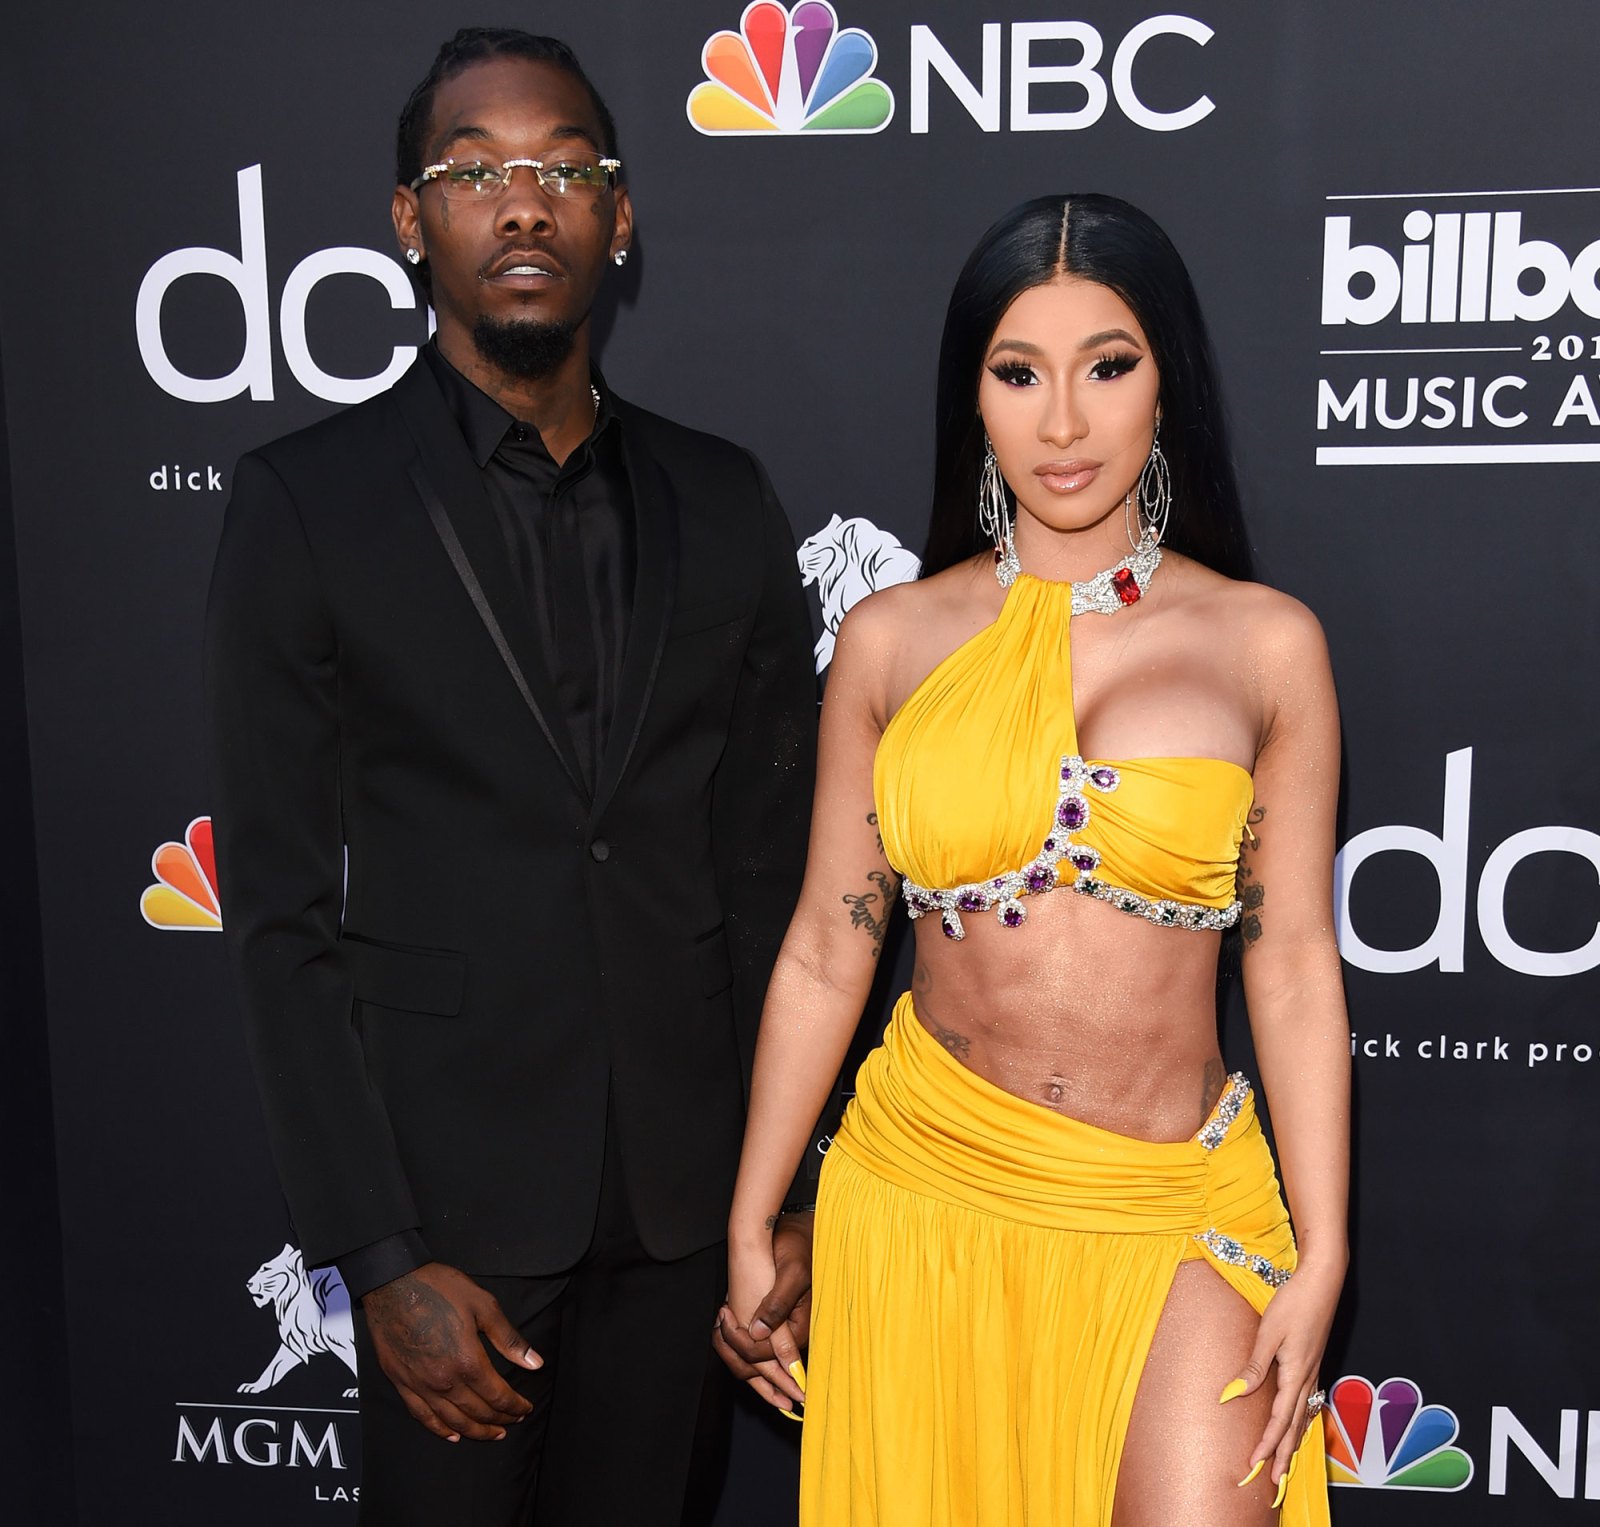 Cardi B and Offset’s Family Album With Son Wave